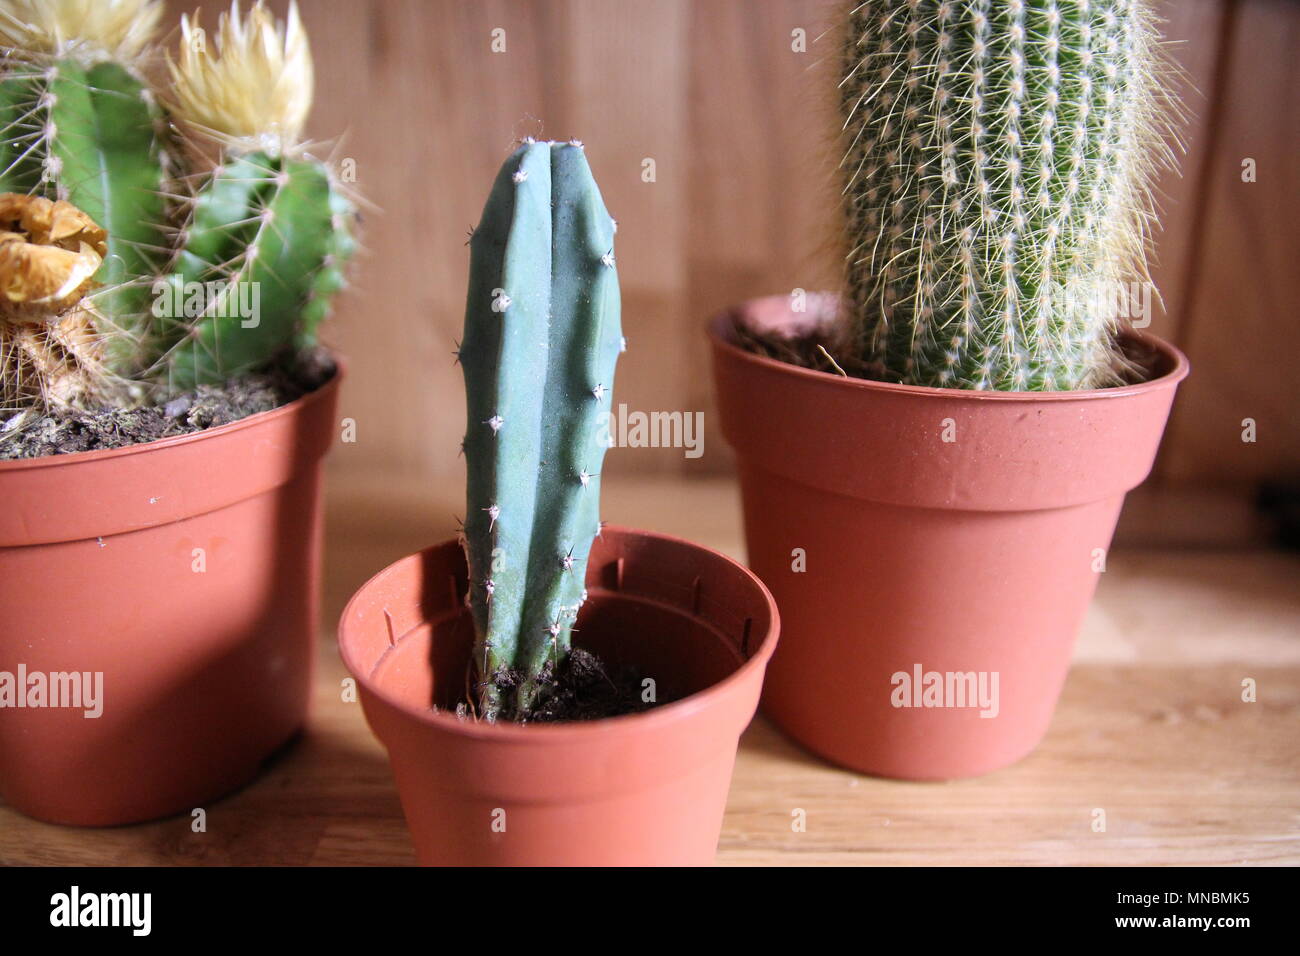 3 different types of cacti in brown pots Stock Photo